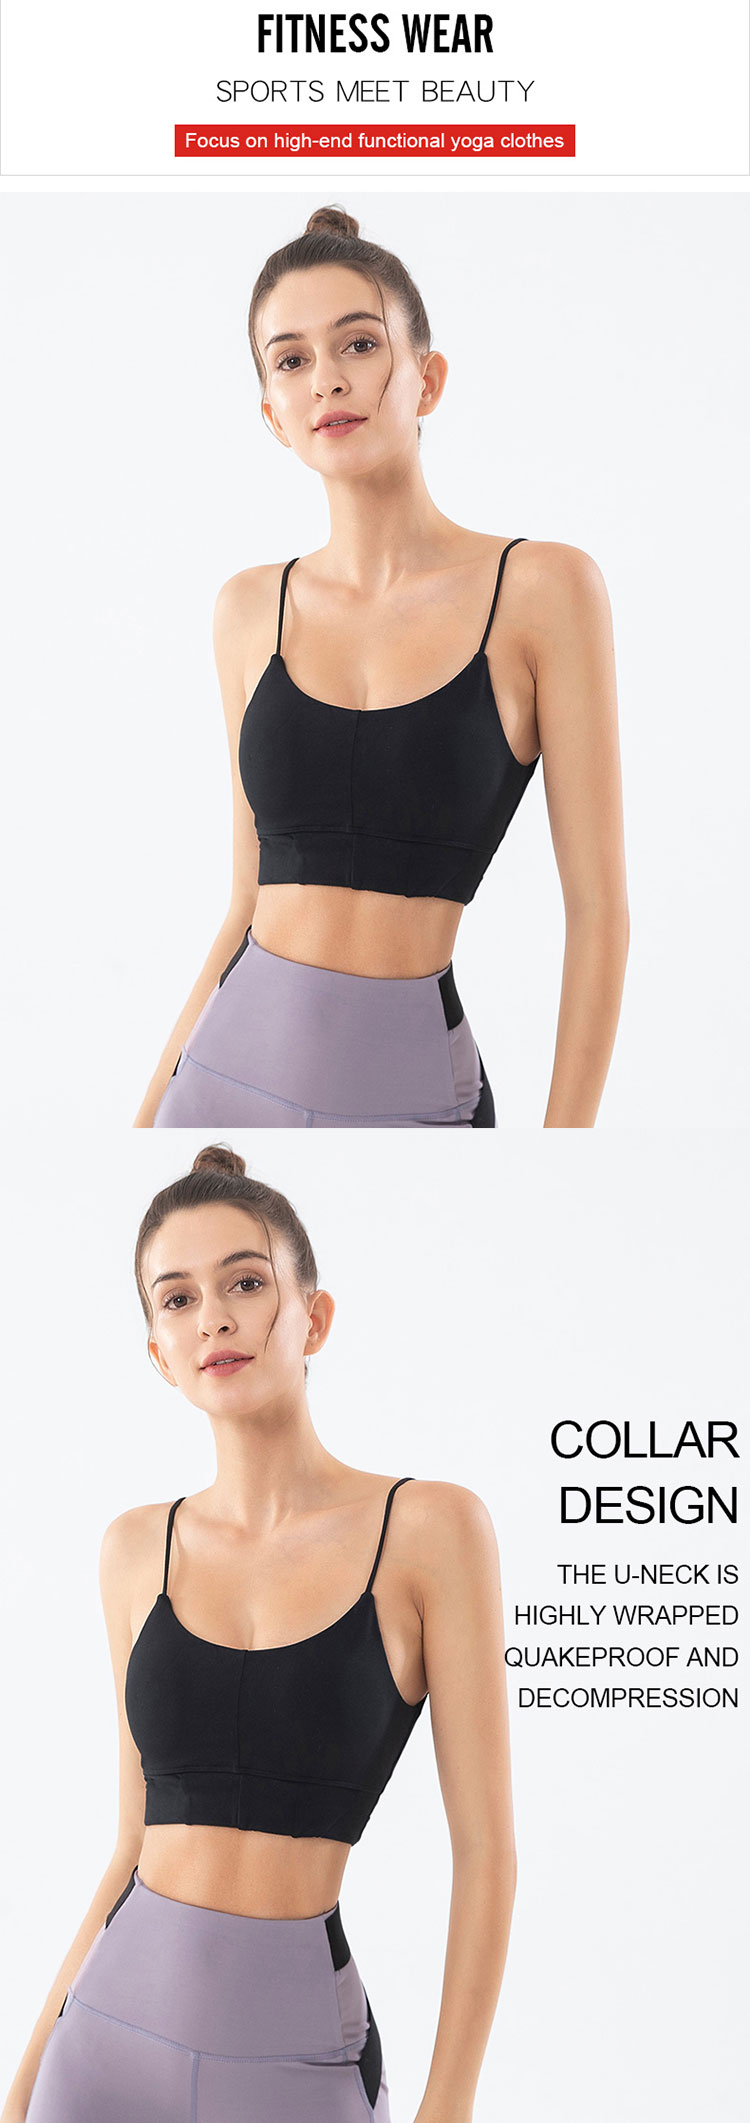 The-womens-sports-bra-takes-comfort-and-skin-friendliness-as-the-core